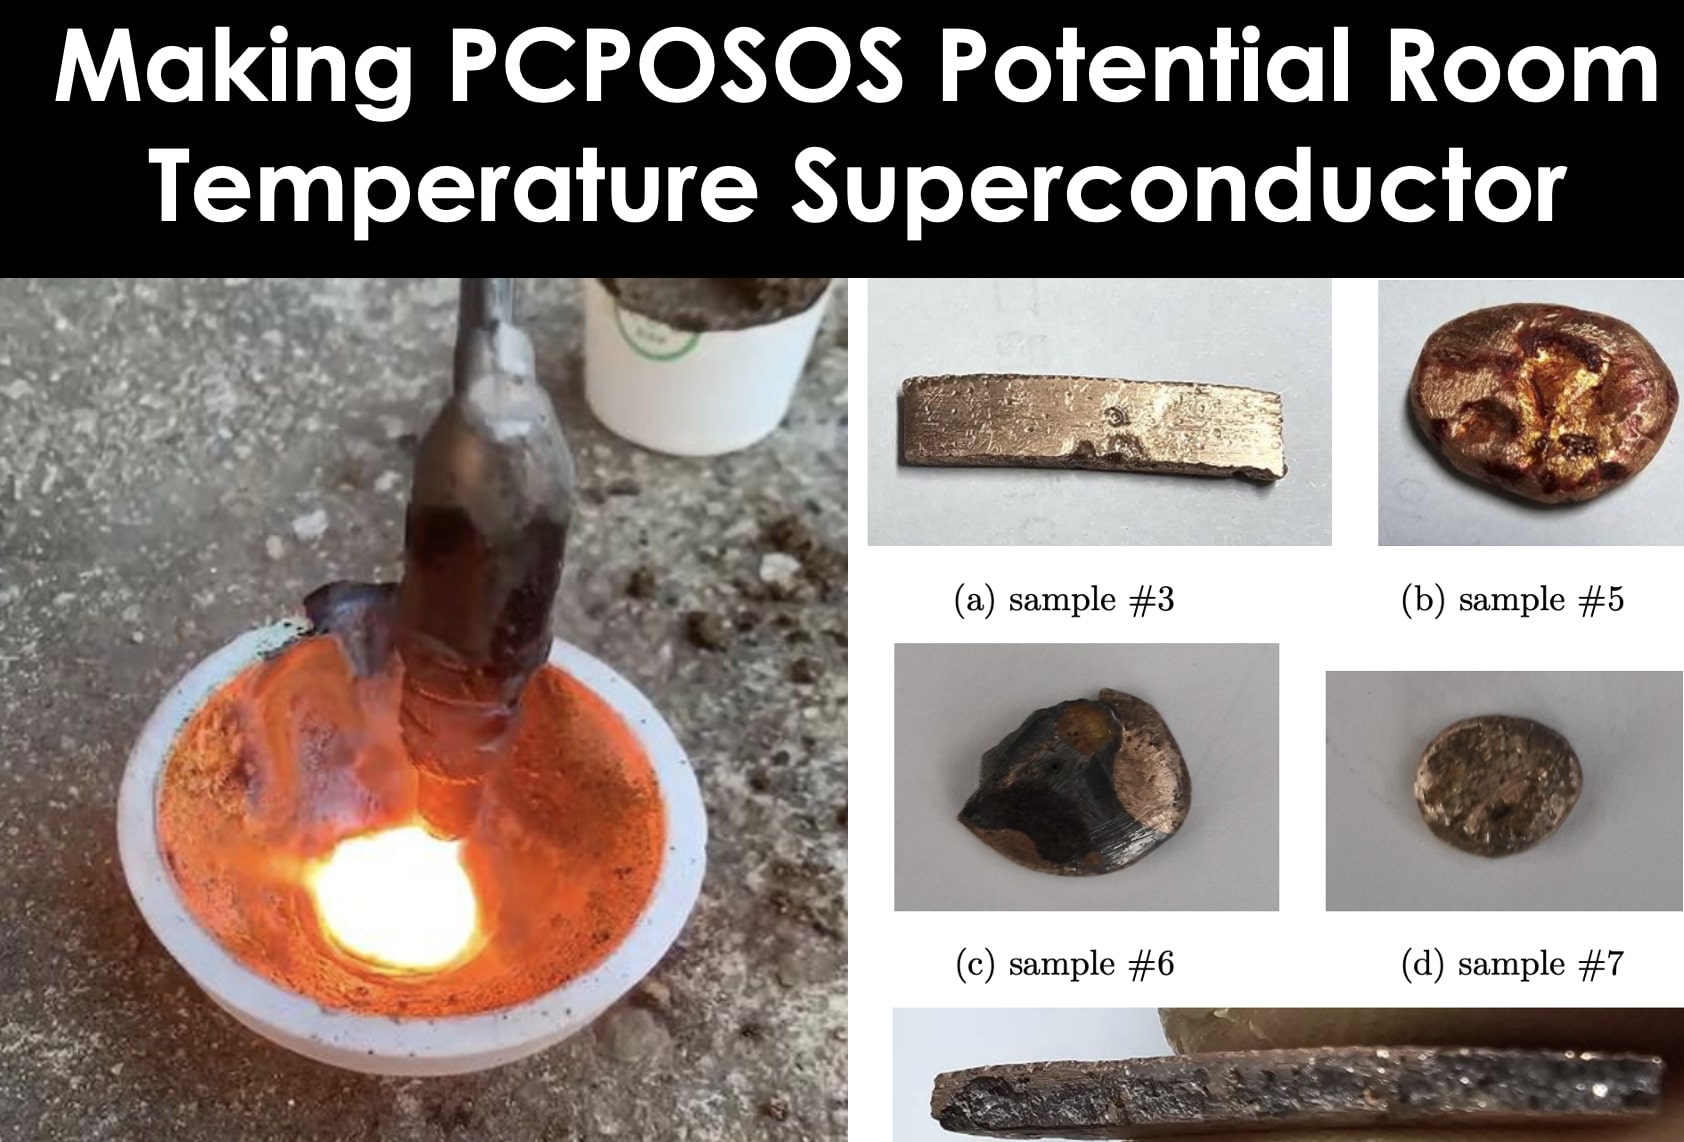 Korean SCT Lab Paper Partially Describes How to Make Potential Room Temperature Superconductor Pb-Cu-P-S-O